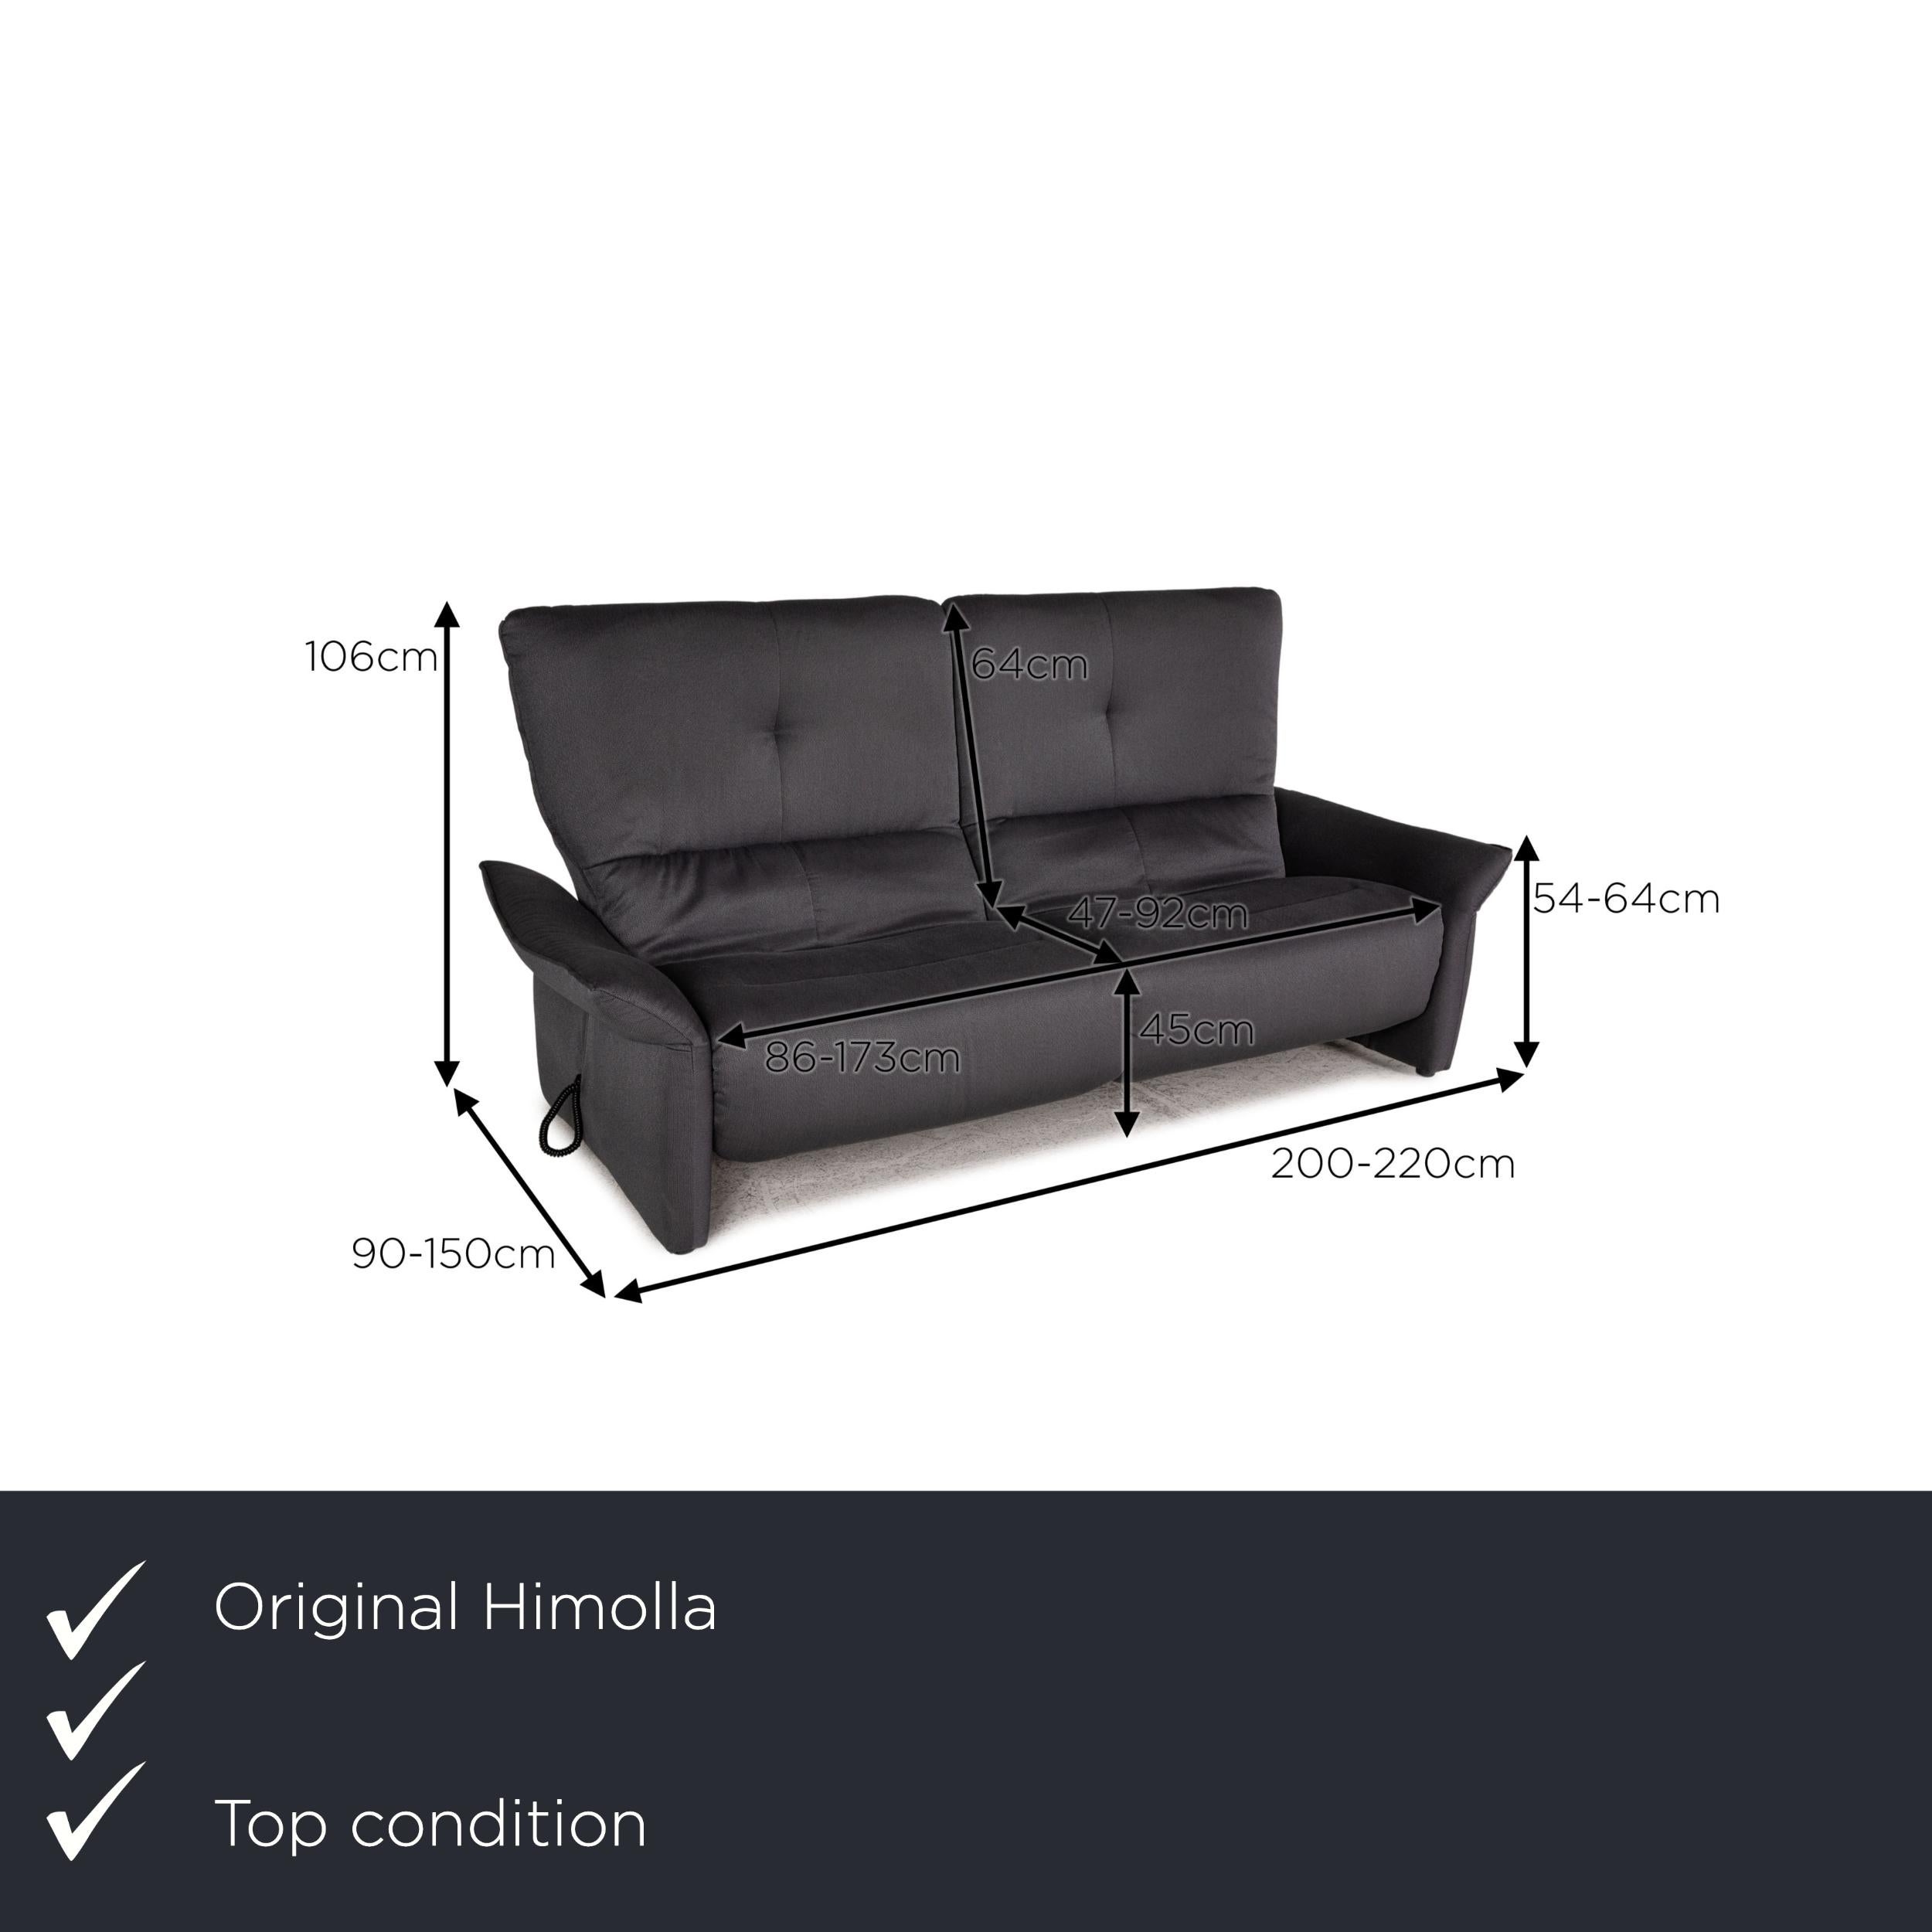 We present to you a Himolla Cumuly fabric sofa gray three-seater couch function relax function.

Product measurements in centimeters:

depth: 90
width: 200
height: 106
seat height: 45
rest height: 54
seat depth: 47
seat width: 86
back